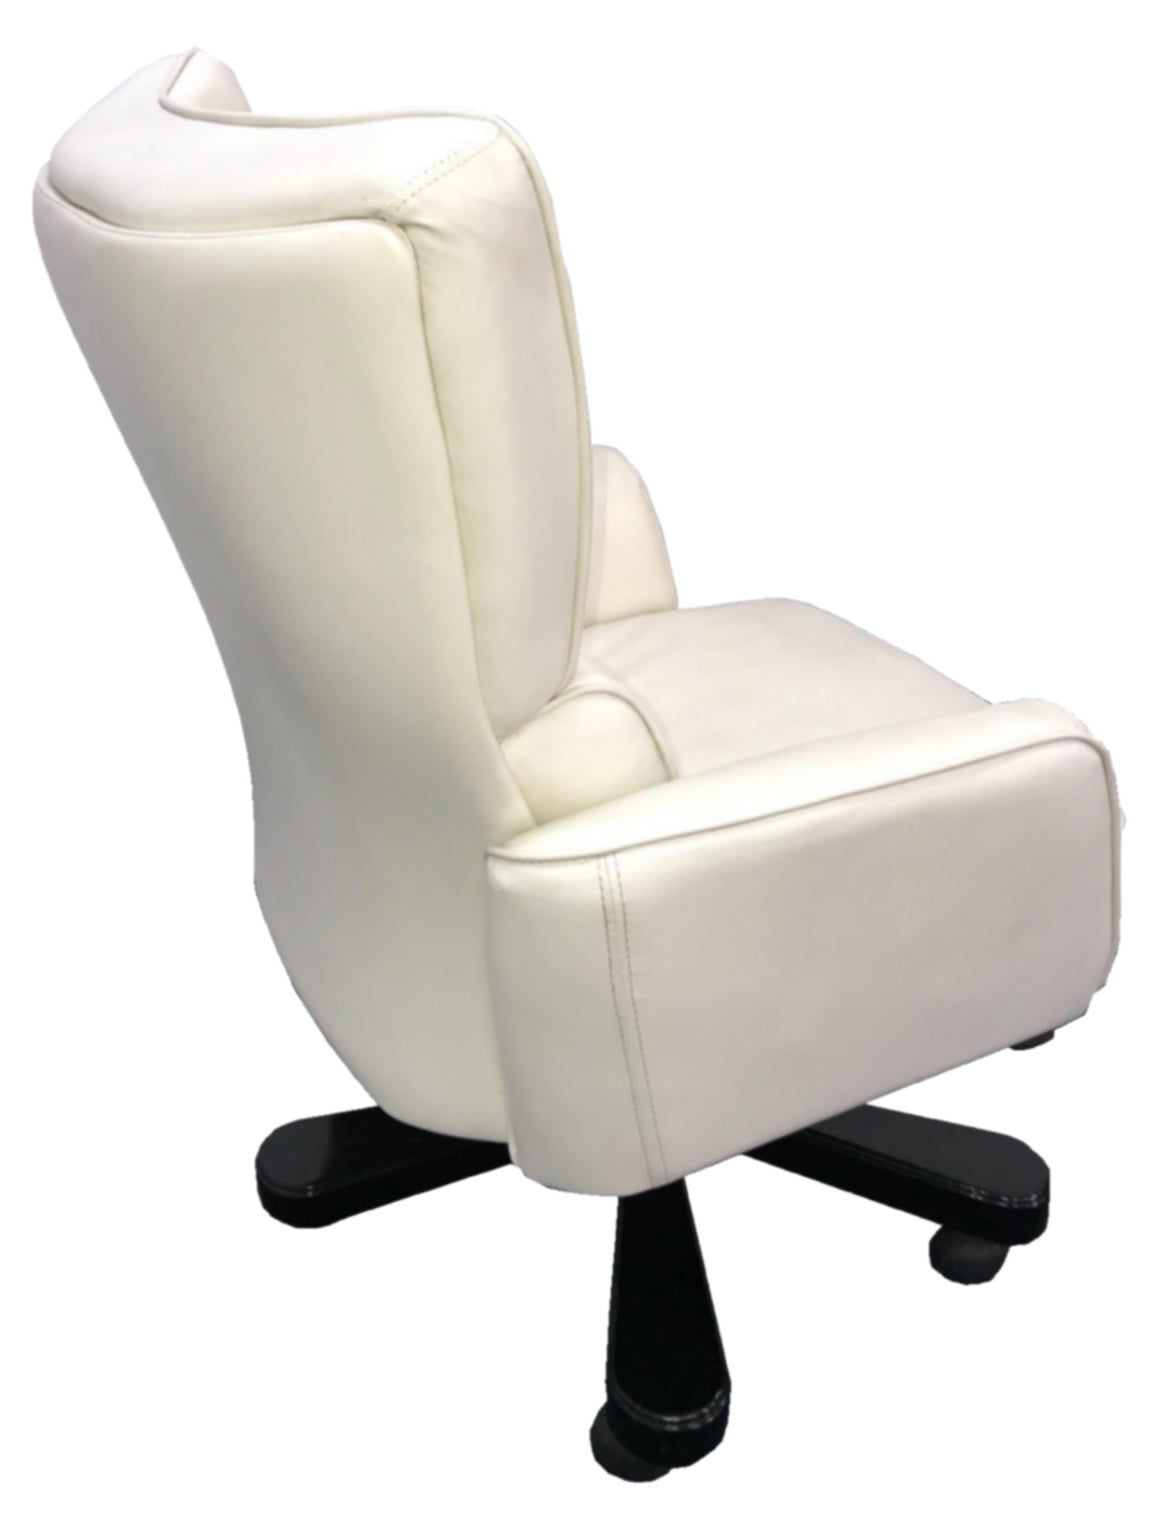 Executive Office Chair Genuine White Leather - DES-B011-W